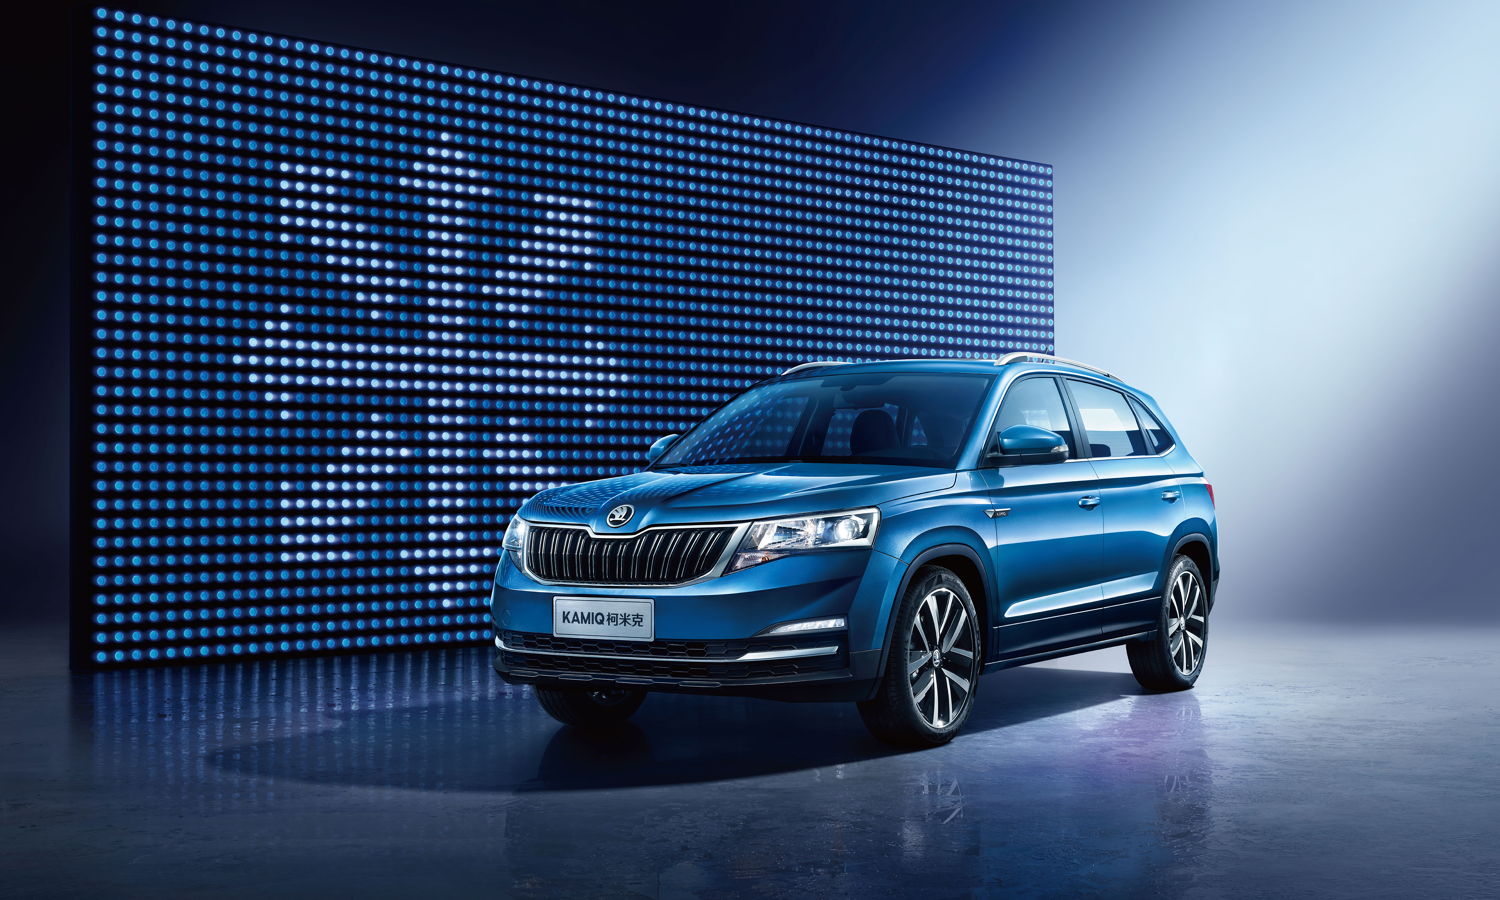 The KAMIQ's design comes with all the features of ŠKODA's powerful SUV design language. The typical radiator grille with its vertical double slats is an unmistakeable expression of ŠKODA's DNA.